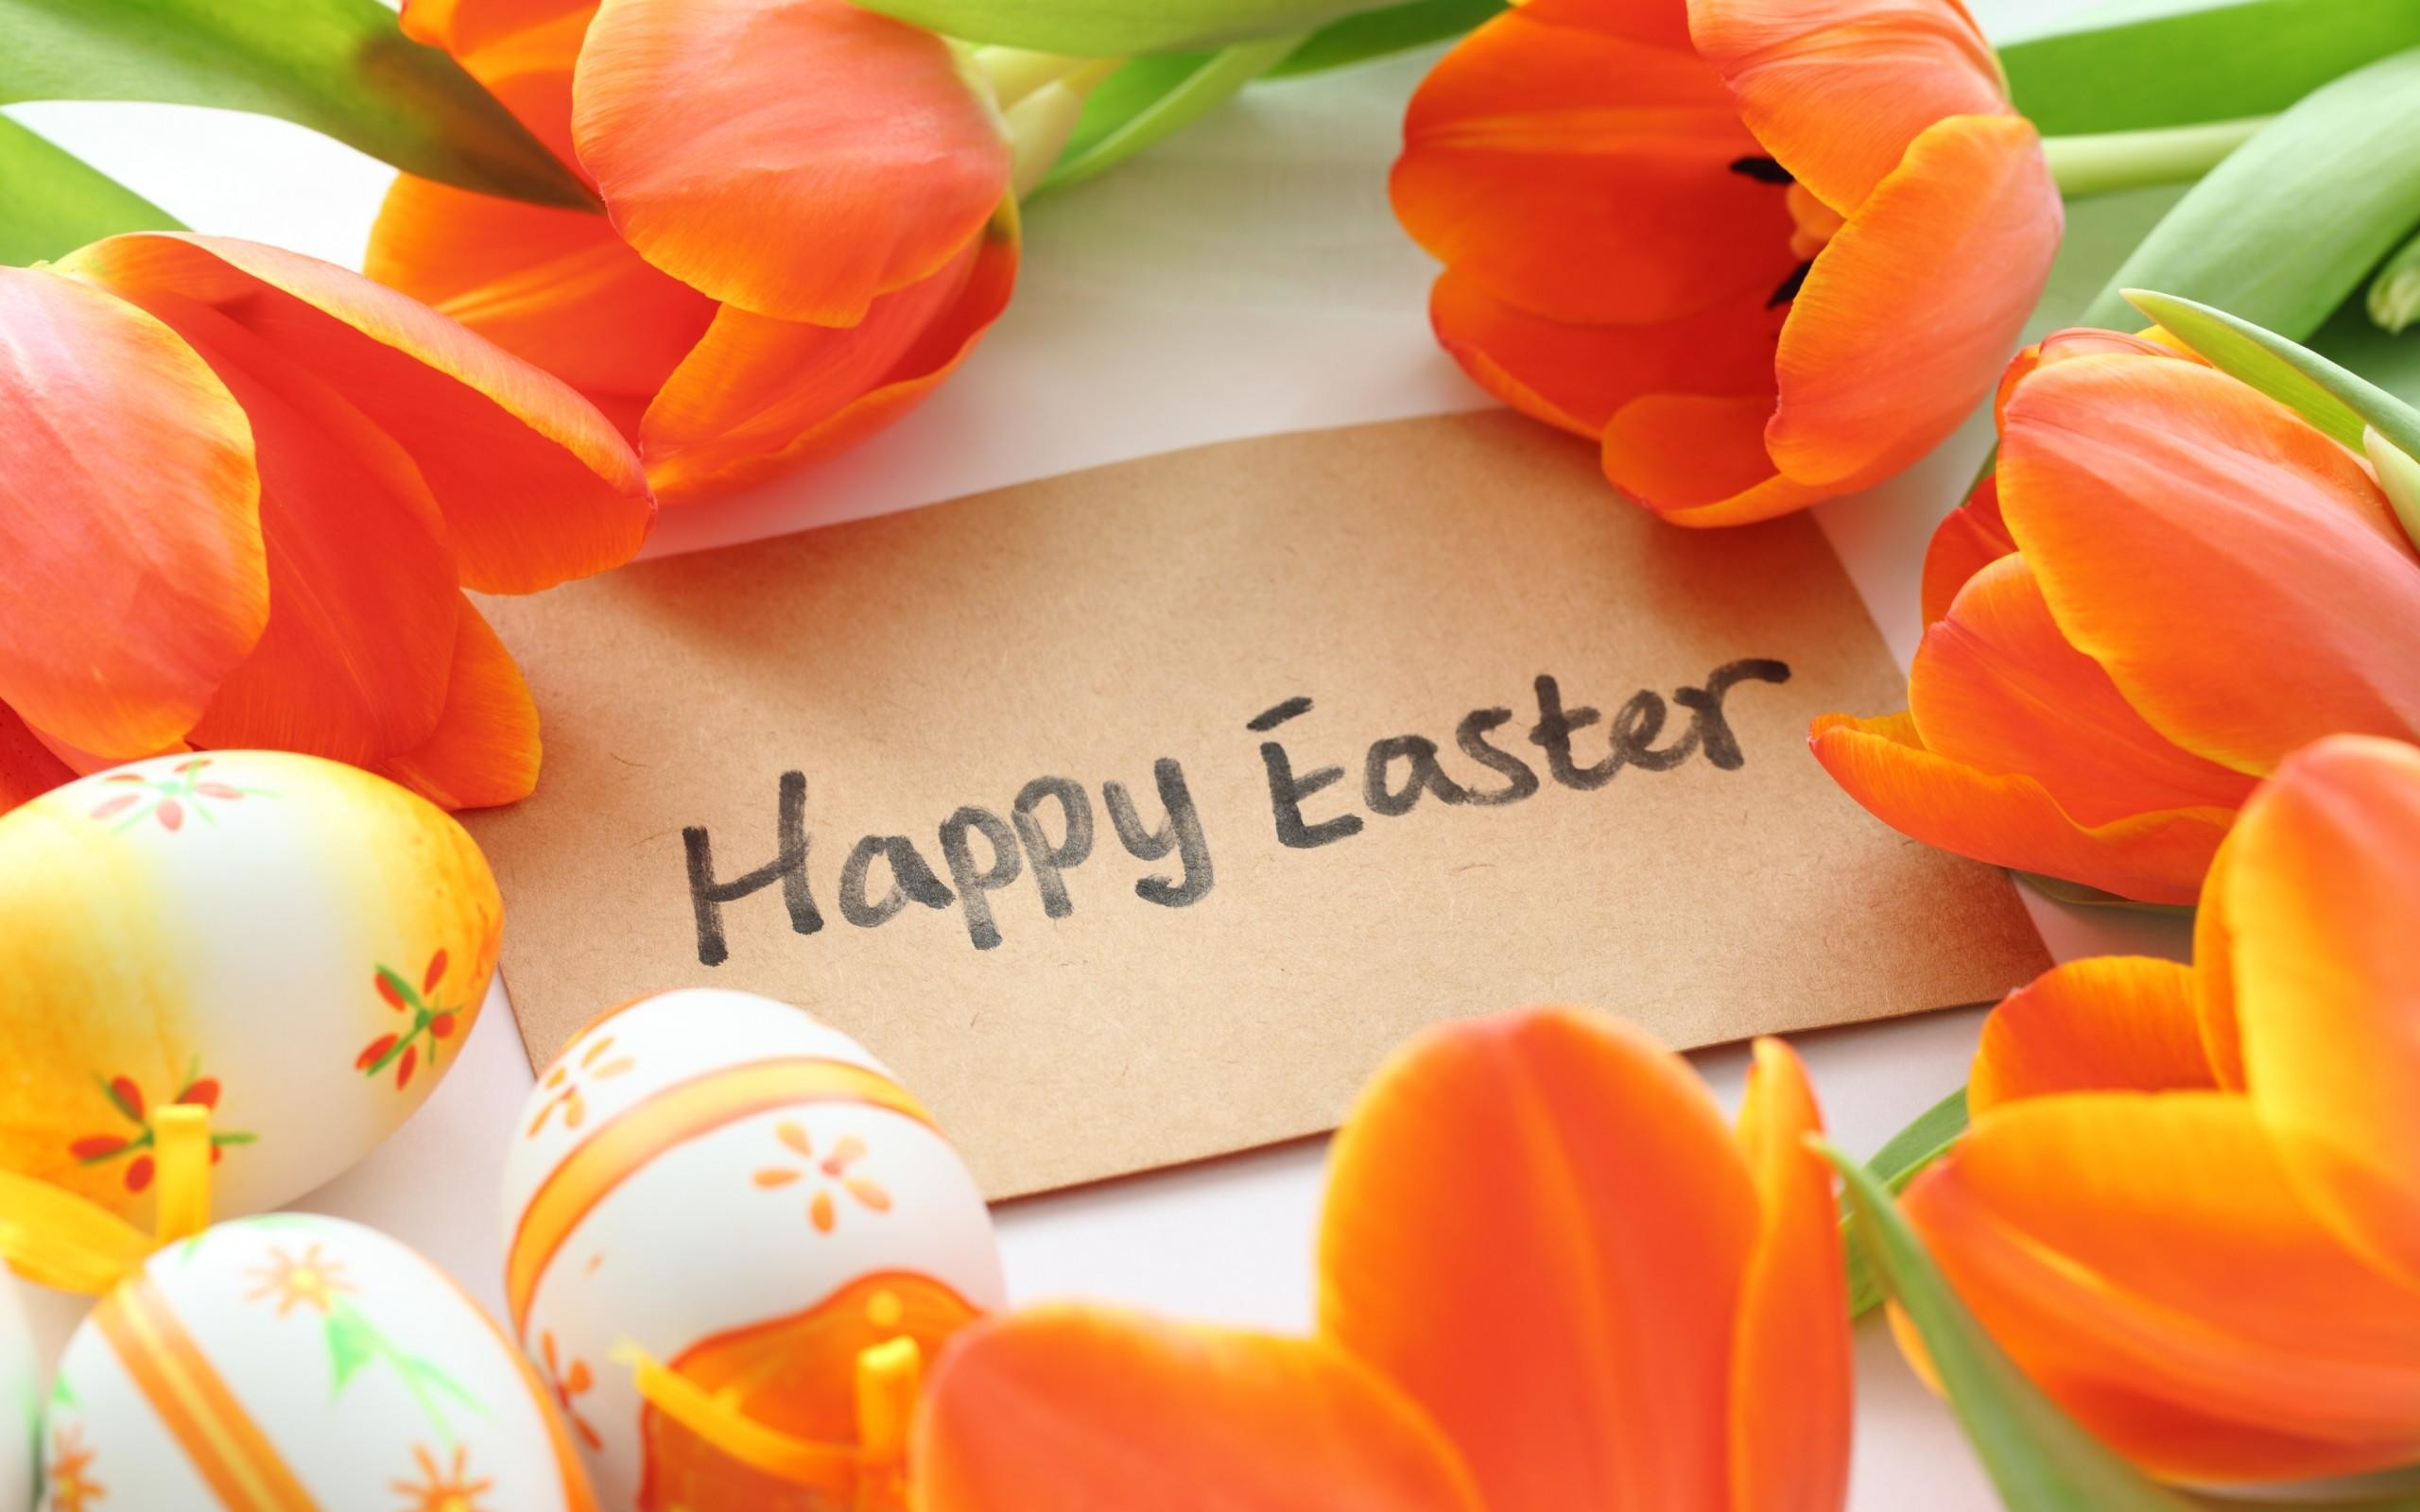 Happy Easter Wallpaper Pictures 63 images